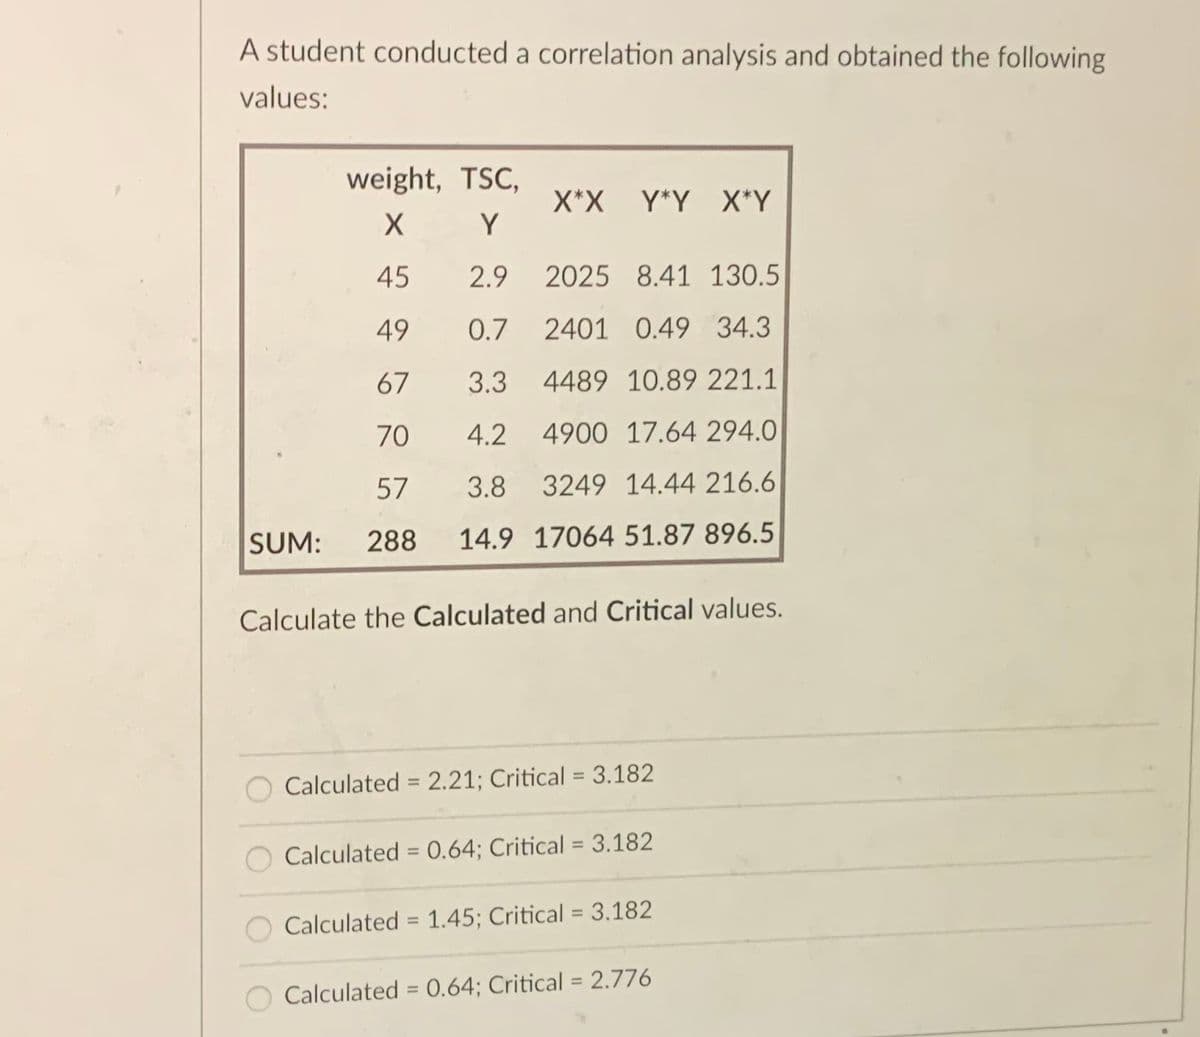 A student conducted a correlation analysis and obtained the following
values:
weight, TSC,
X*X
Y*Y X*Y
Y
45
2.9
2025 8.41 130.5
49
0.7 2401 0.49 34.3
67
3.3 4489 10.89 221.1
70
4.2
4900 17.64 294.0
57
3.8
3249 14.44 216.6
SUM:
288
14.9 17064 51.87 896.5
Calculate the Calculated and Critical values.
%3D
Calculated = 2.21; Critical = 3.182
Calculated = 0.64; Critical = 3.182
Calculated = 1.45; Critical = 3.182
Calculated = 0.64; Critical = 2.776
